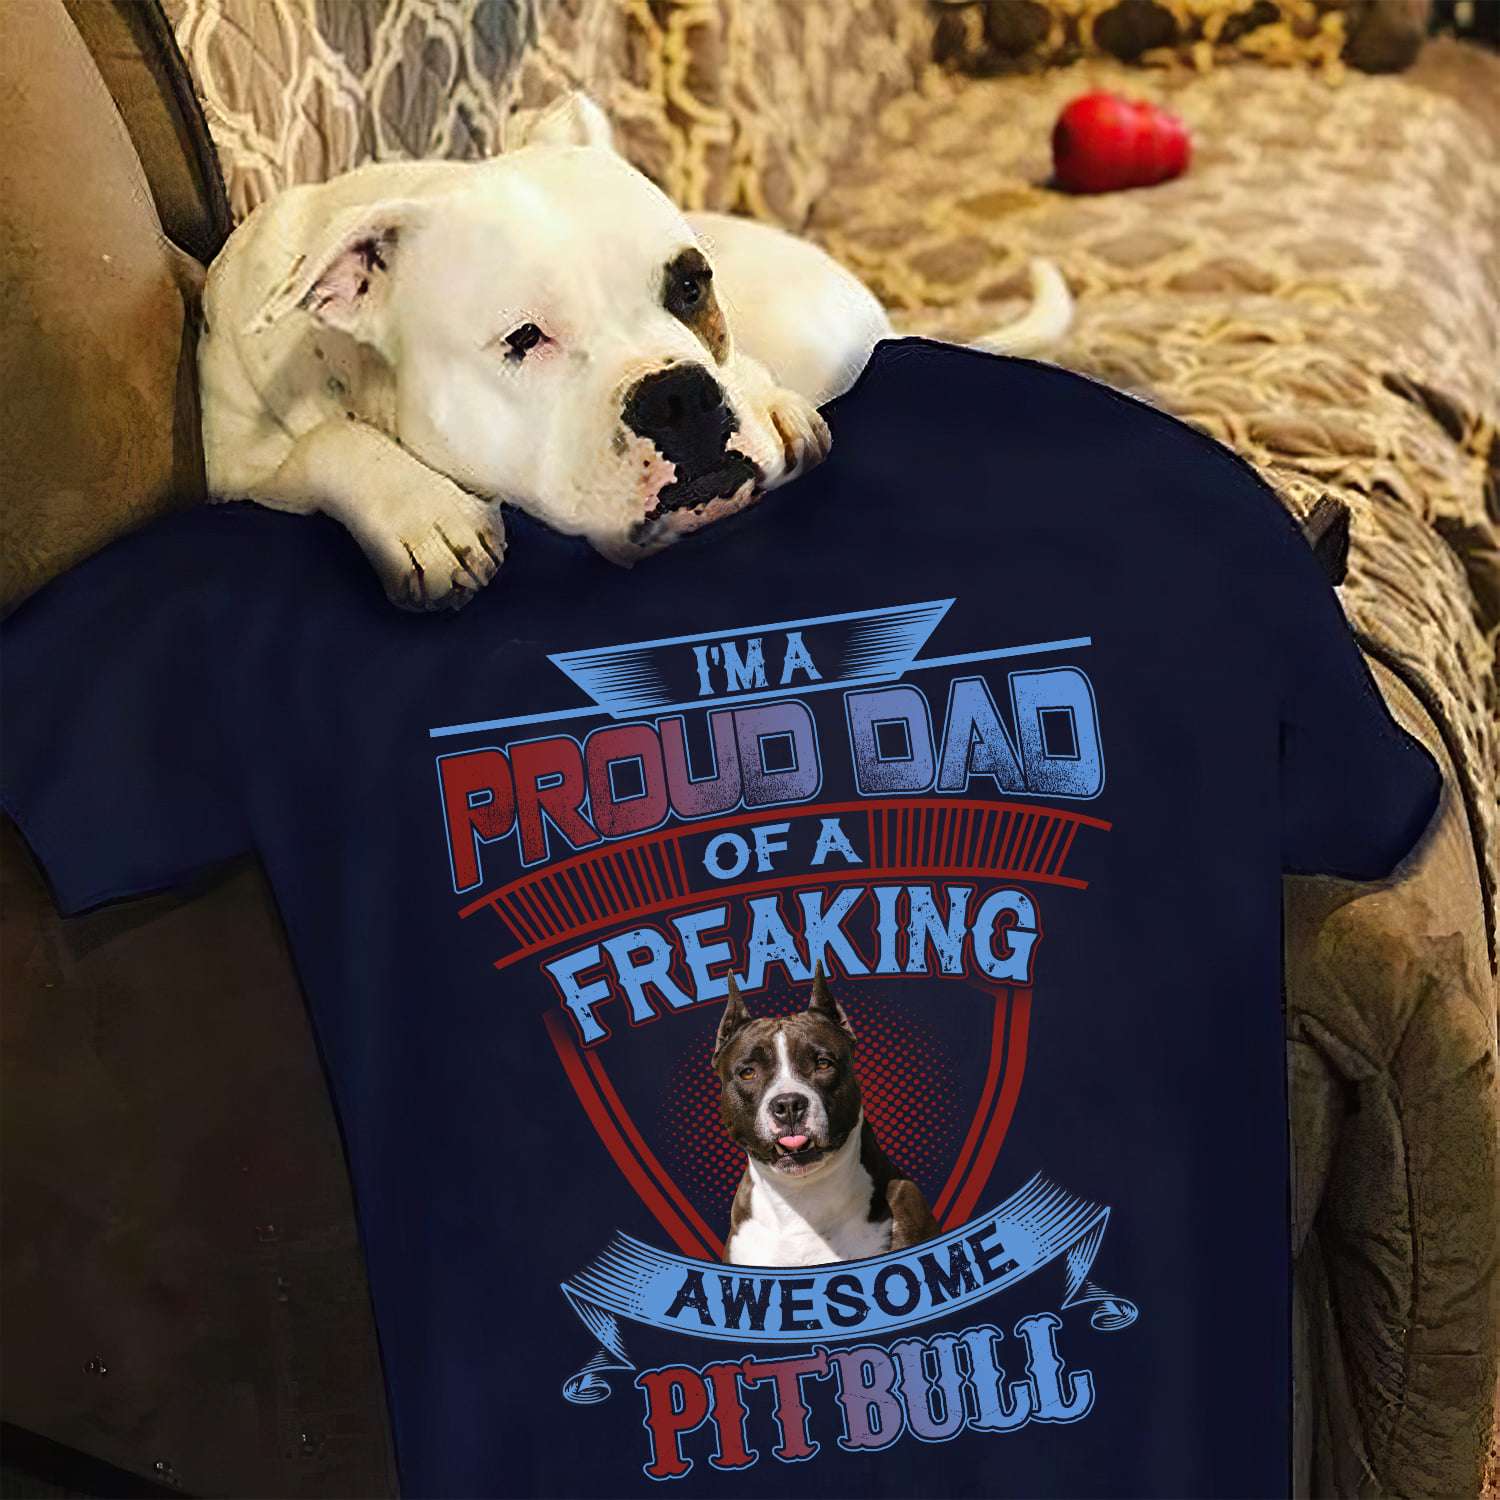 I'm a proud dad of a freaking awesome Pitbull - Pitbull dad, dog father